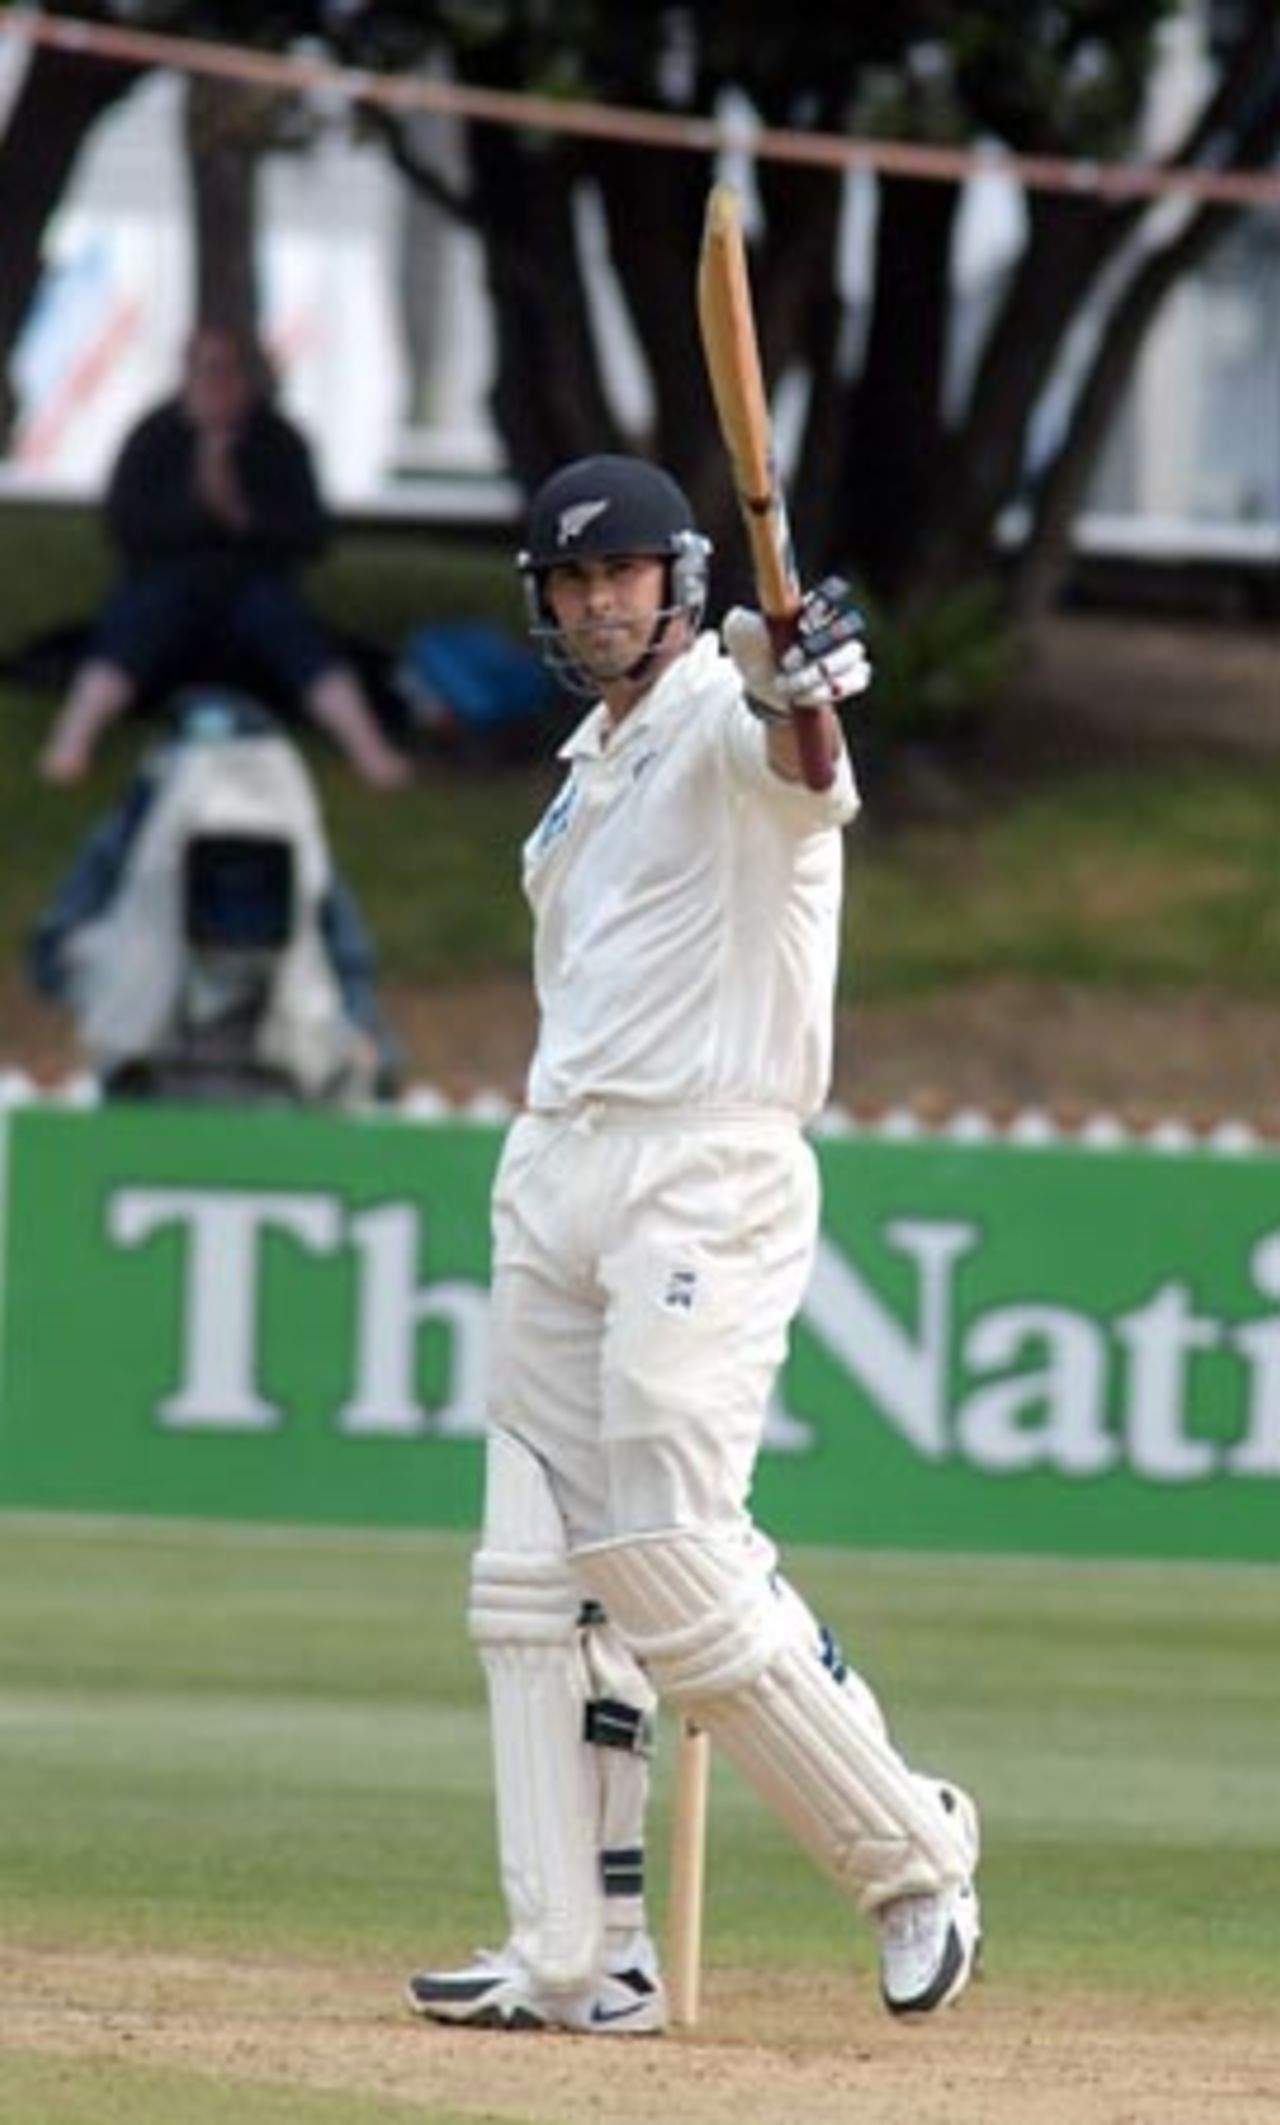 New Zealand batsman Stephen Fleming raises his bat upon reaching his 50. Fleming went on to score 61 in his first innings. 2nd Test: New Zealand v Bangladesh at Basin Reserve, Wellington, 26-30 Dec 2001 (29 December 2001).